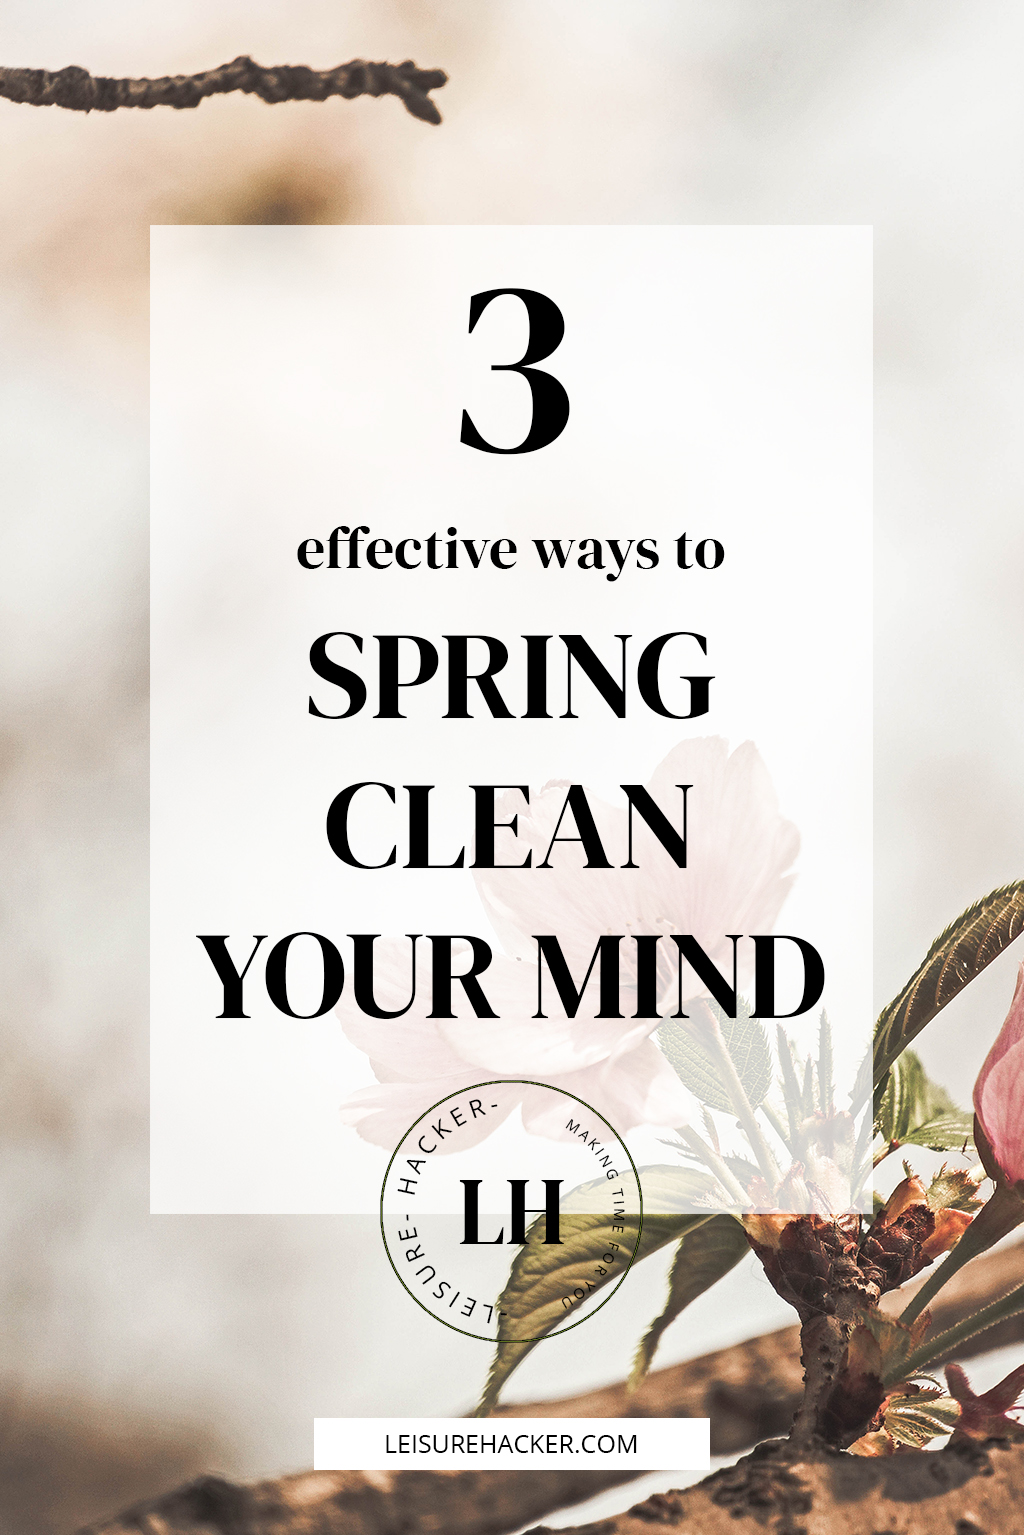 3 effective ways to spring clean your mind